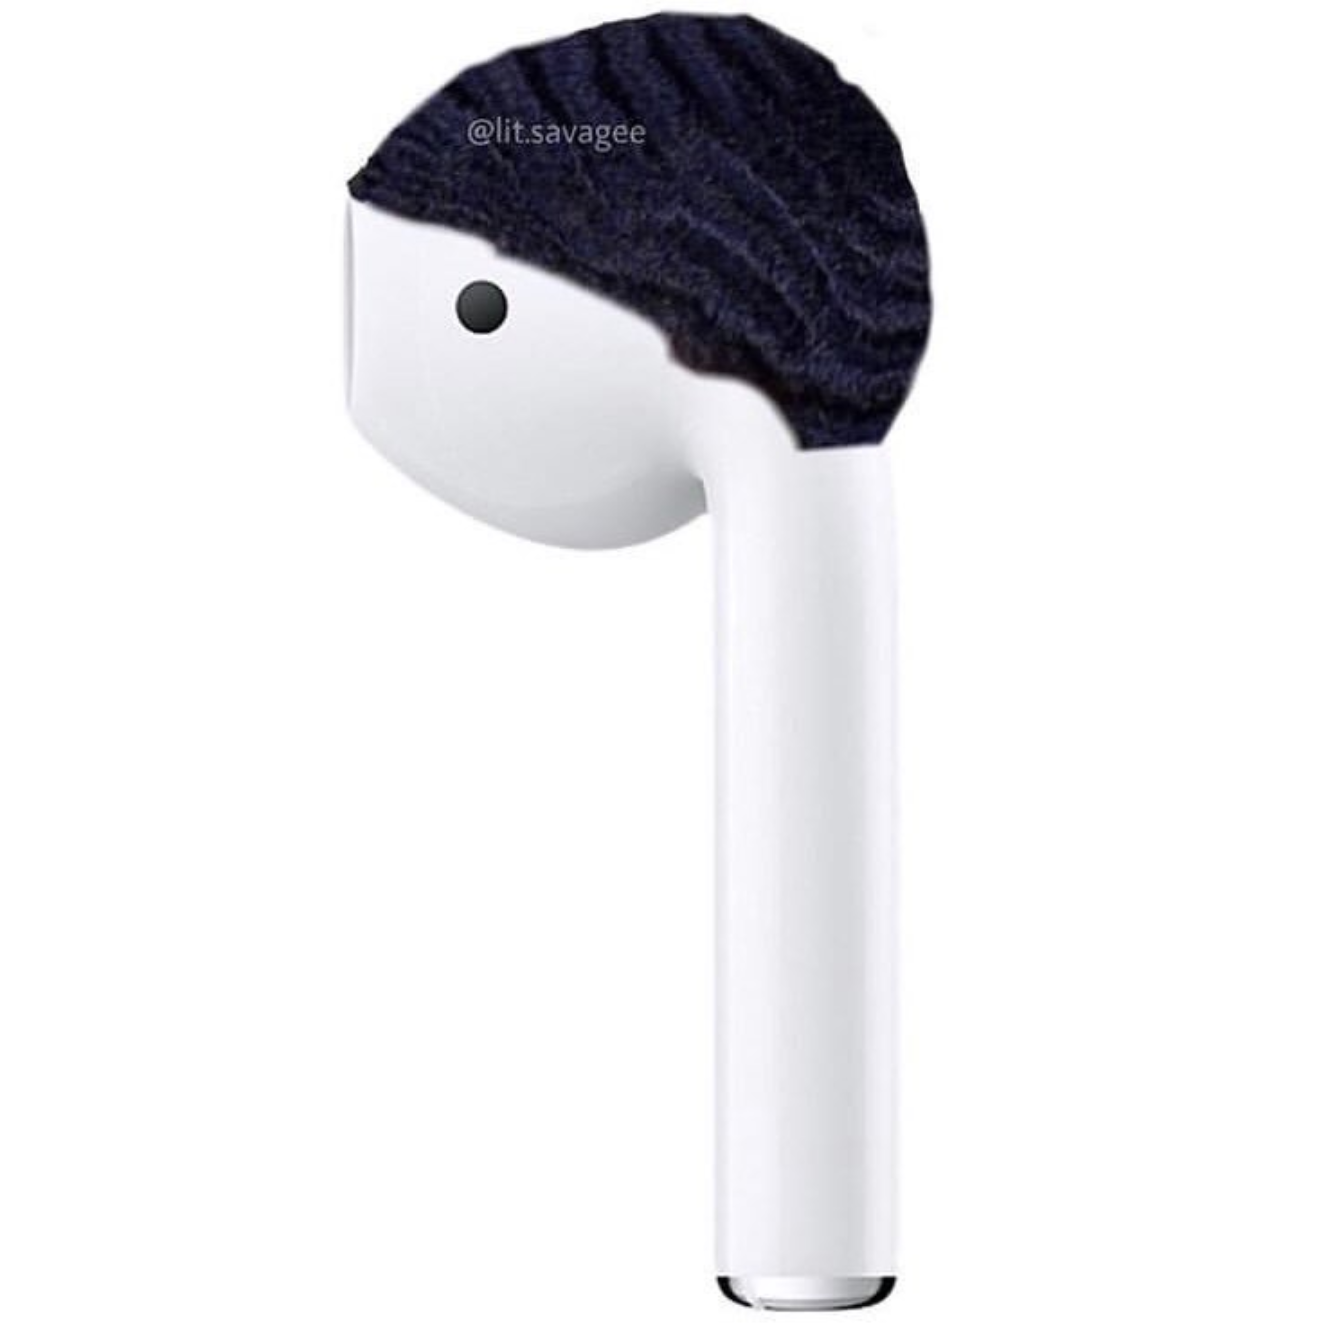 AirPods And Waves Memes